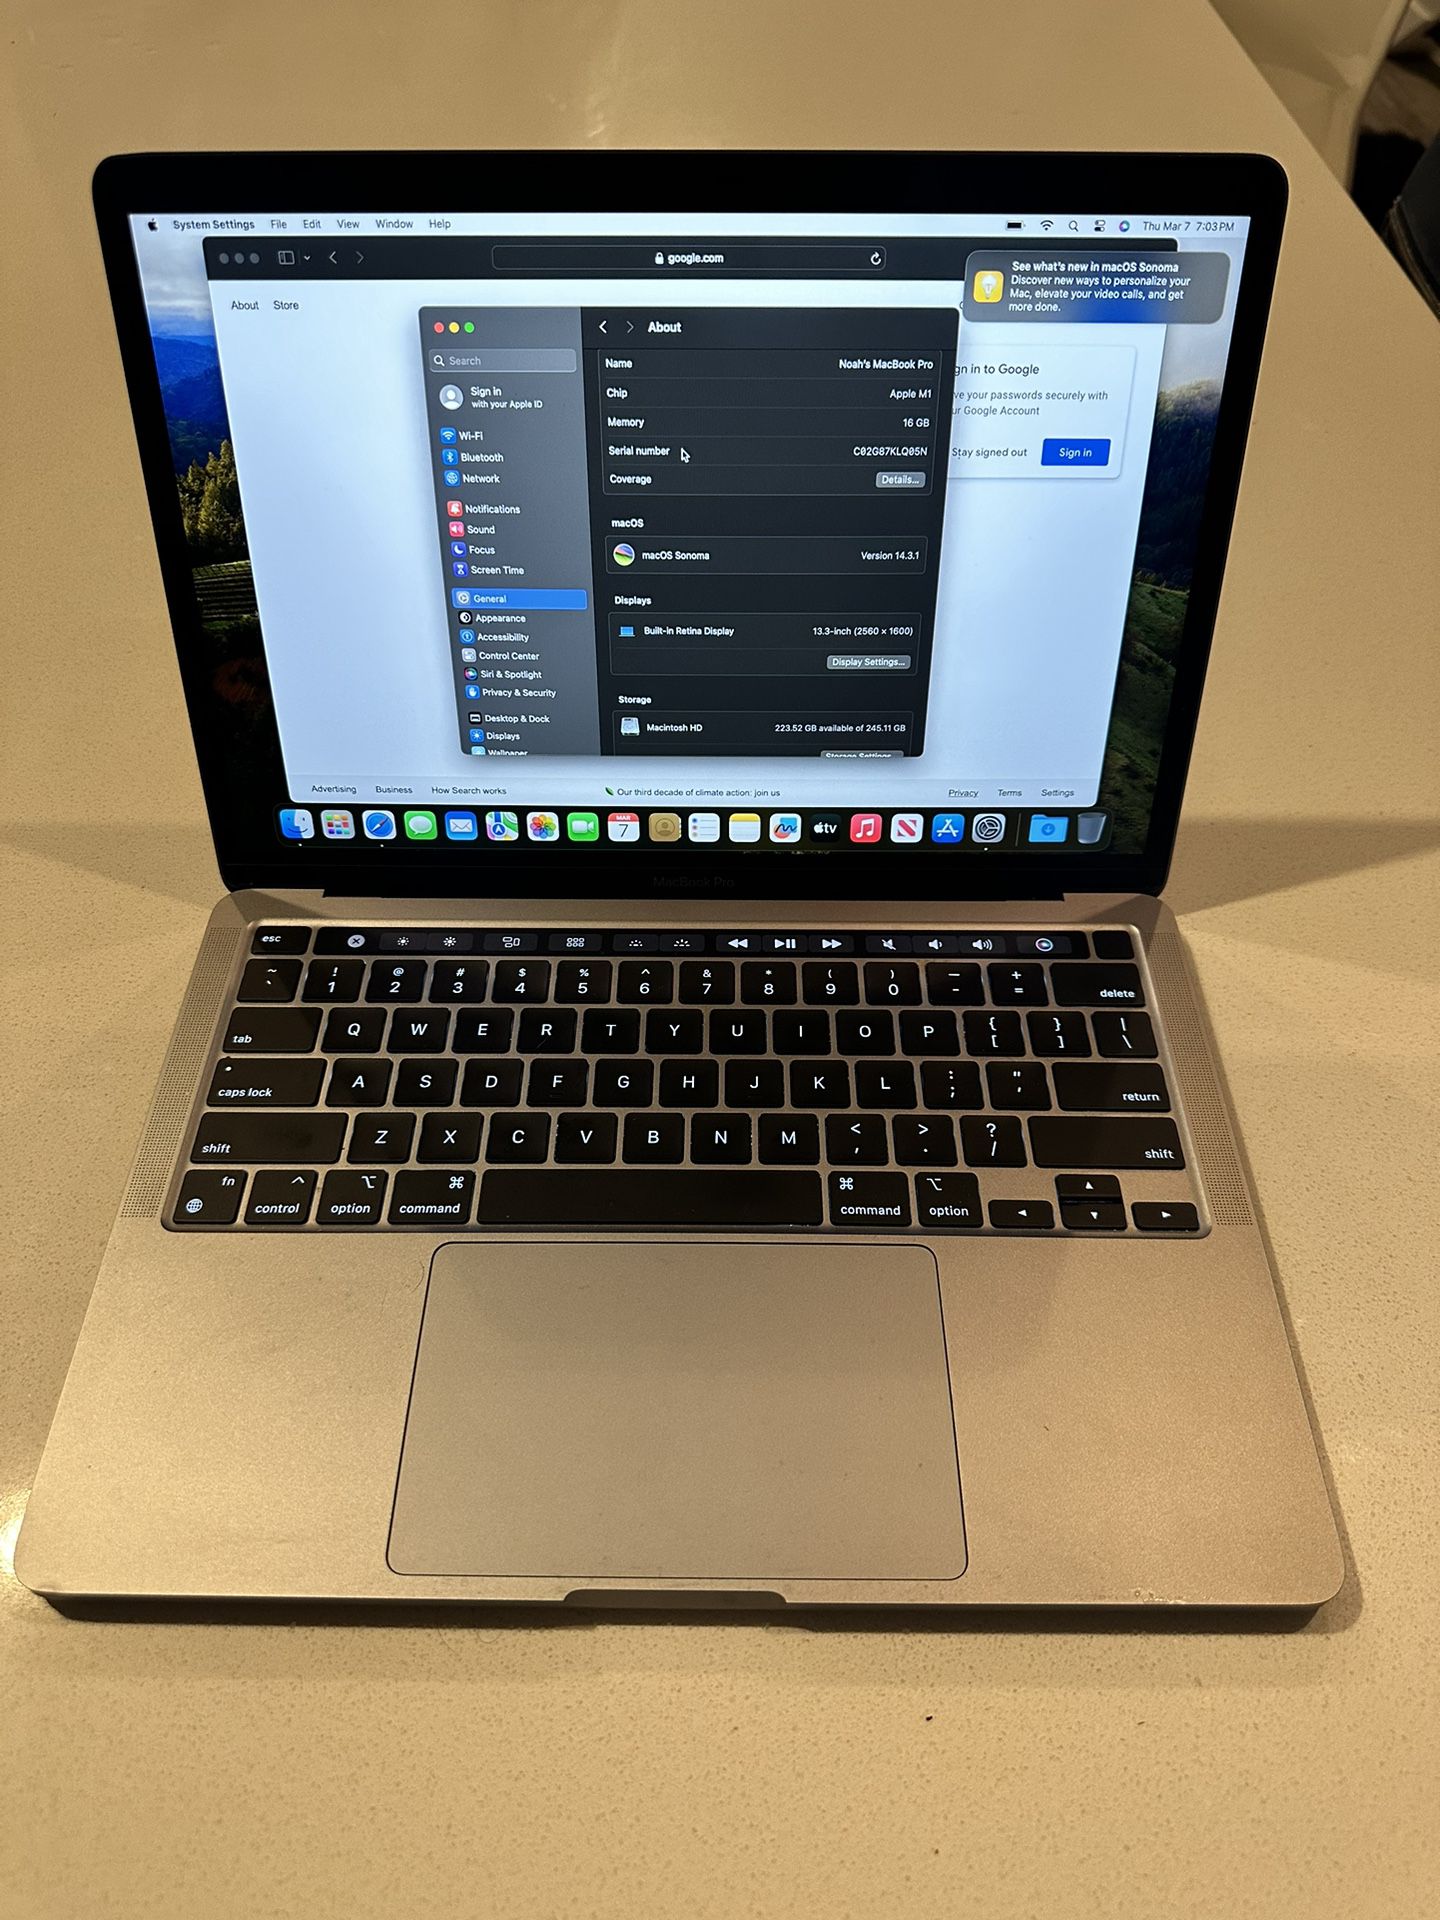 MacBook Pro(fully refurbished) with Touch Bar